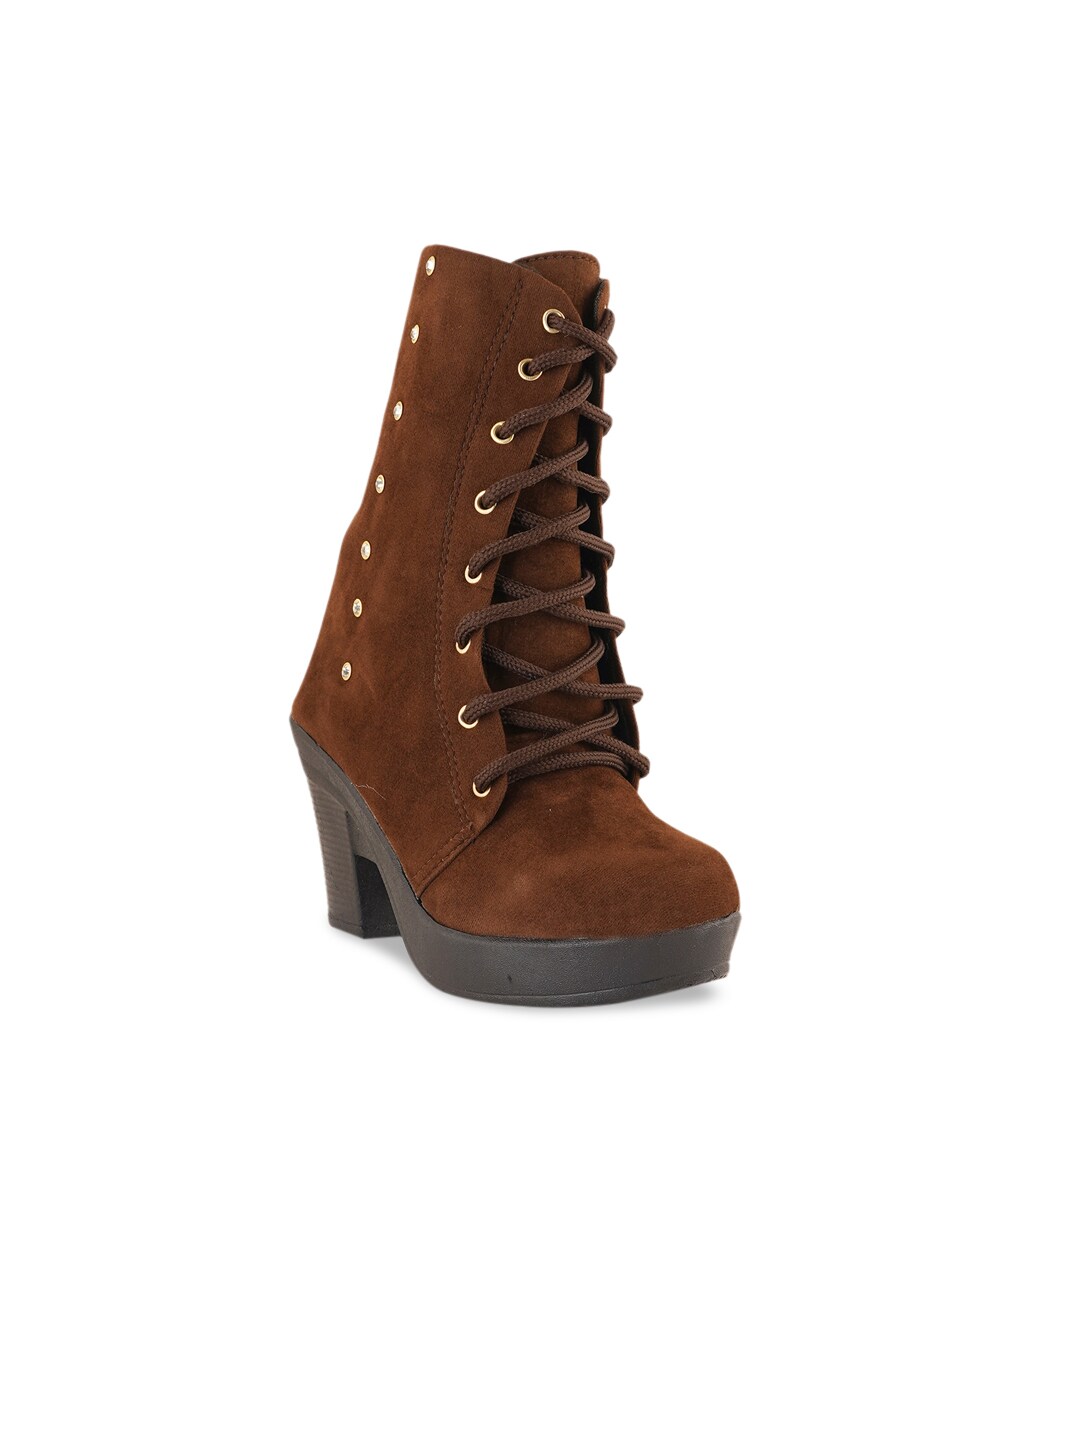 Walkfree Women Brown Suede High-Top Flat Boots Price in India